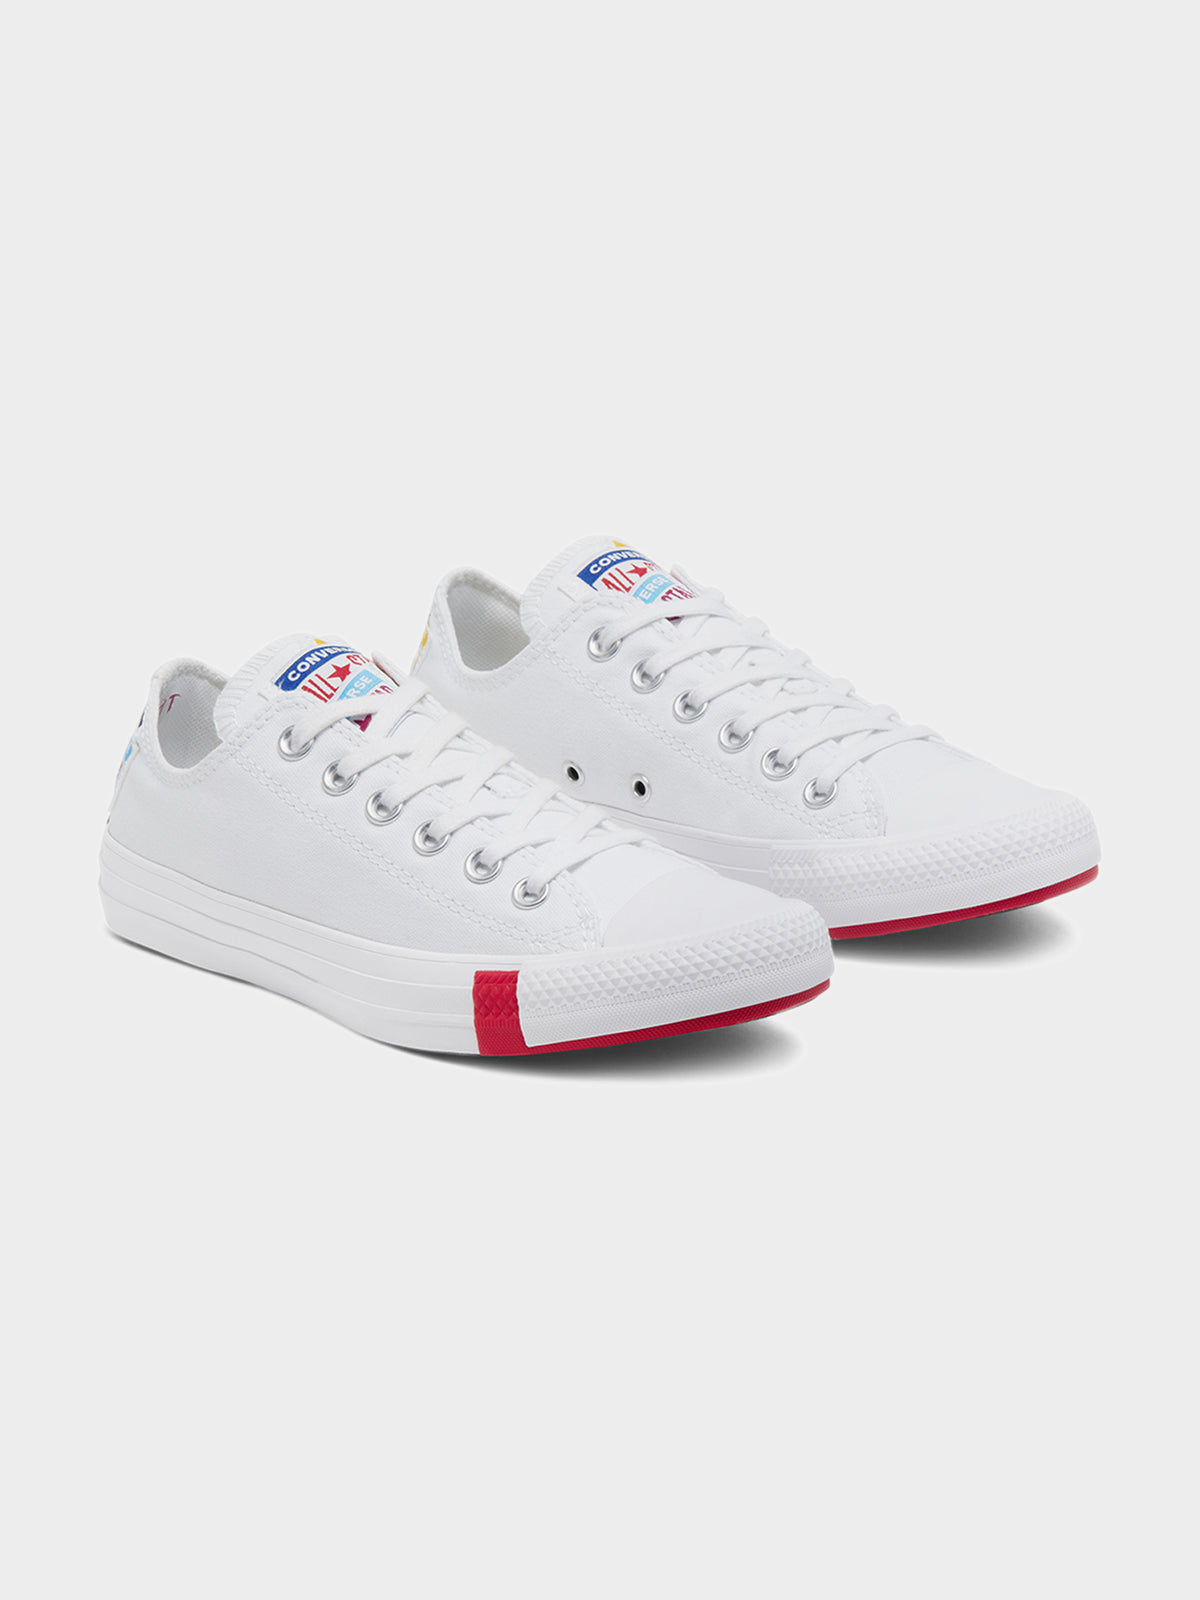 Unisex Chuck Taylor All Star Stacked Logo Low Top Sneakers in White